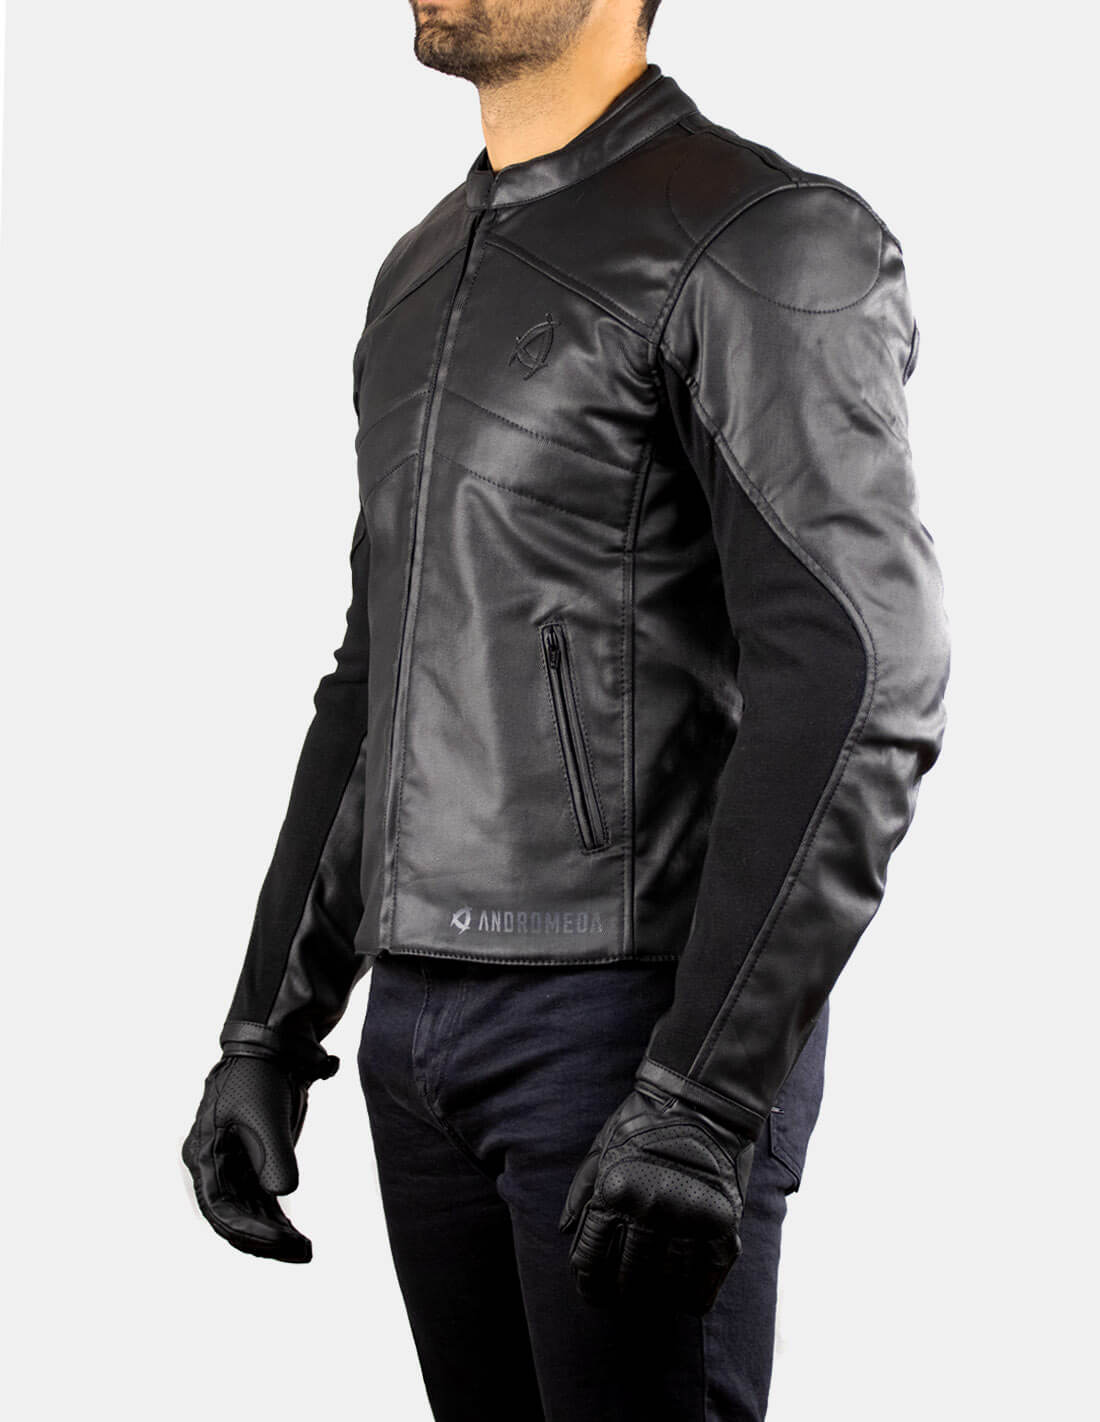 Neowise 2 | Non-leather motorcycle jacket. Cafe racer with